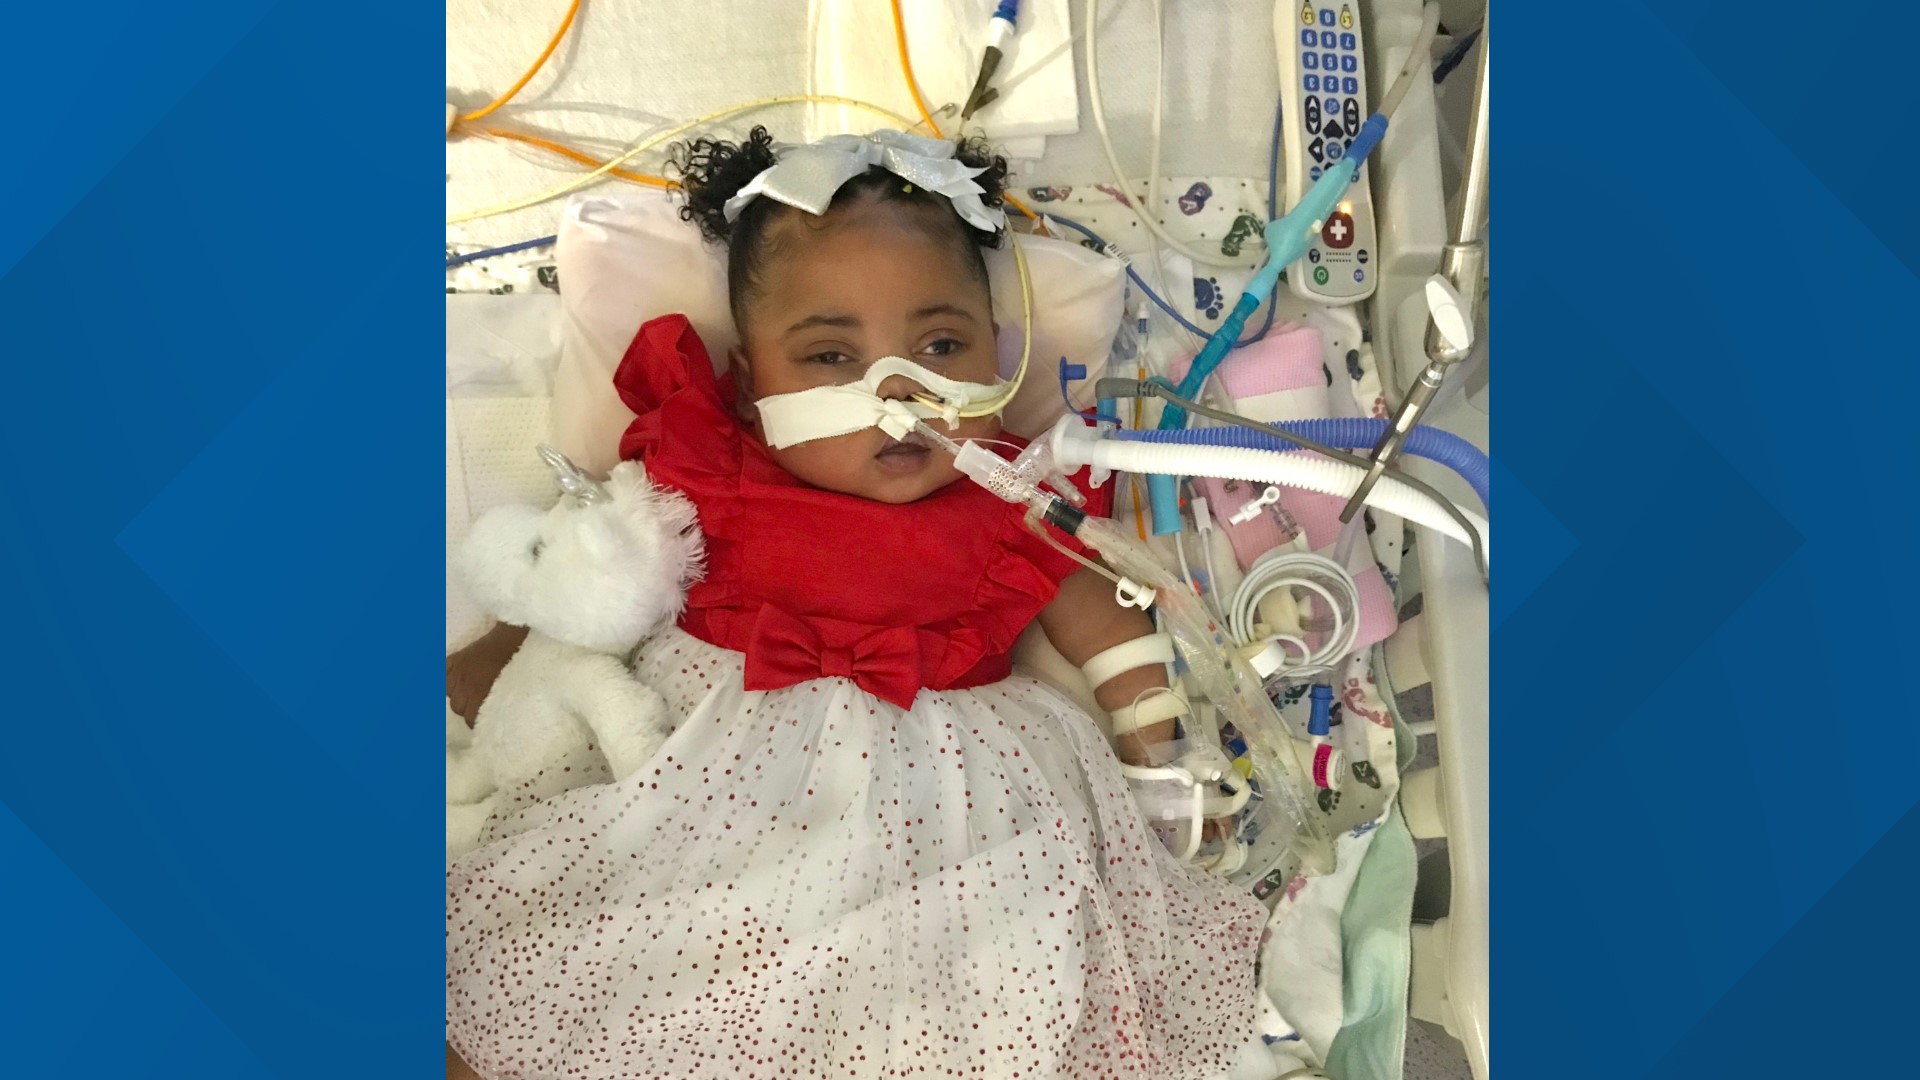 Tinslee Lewis, 11 months, has been on life-sustaining machines for the majority of her life, but Cook Children's doctors say treatment is now causing the baby pain